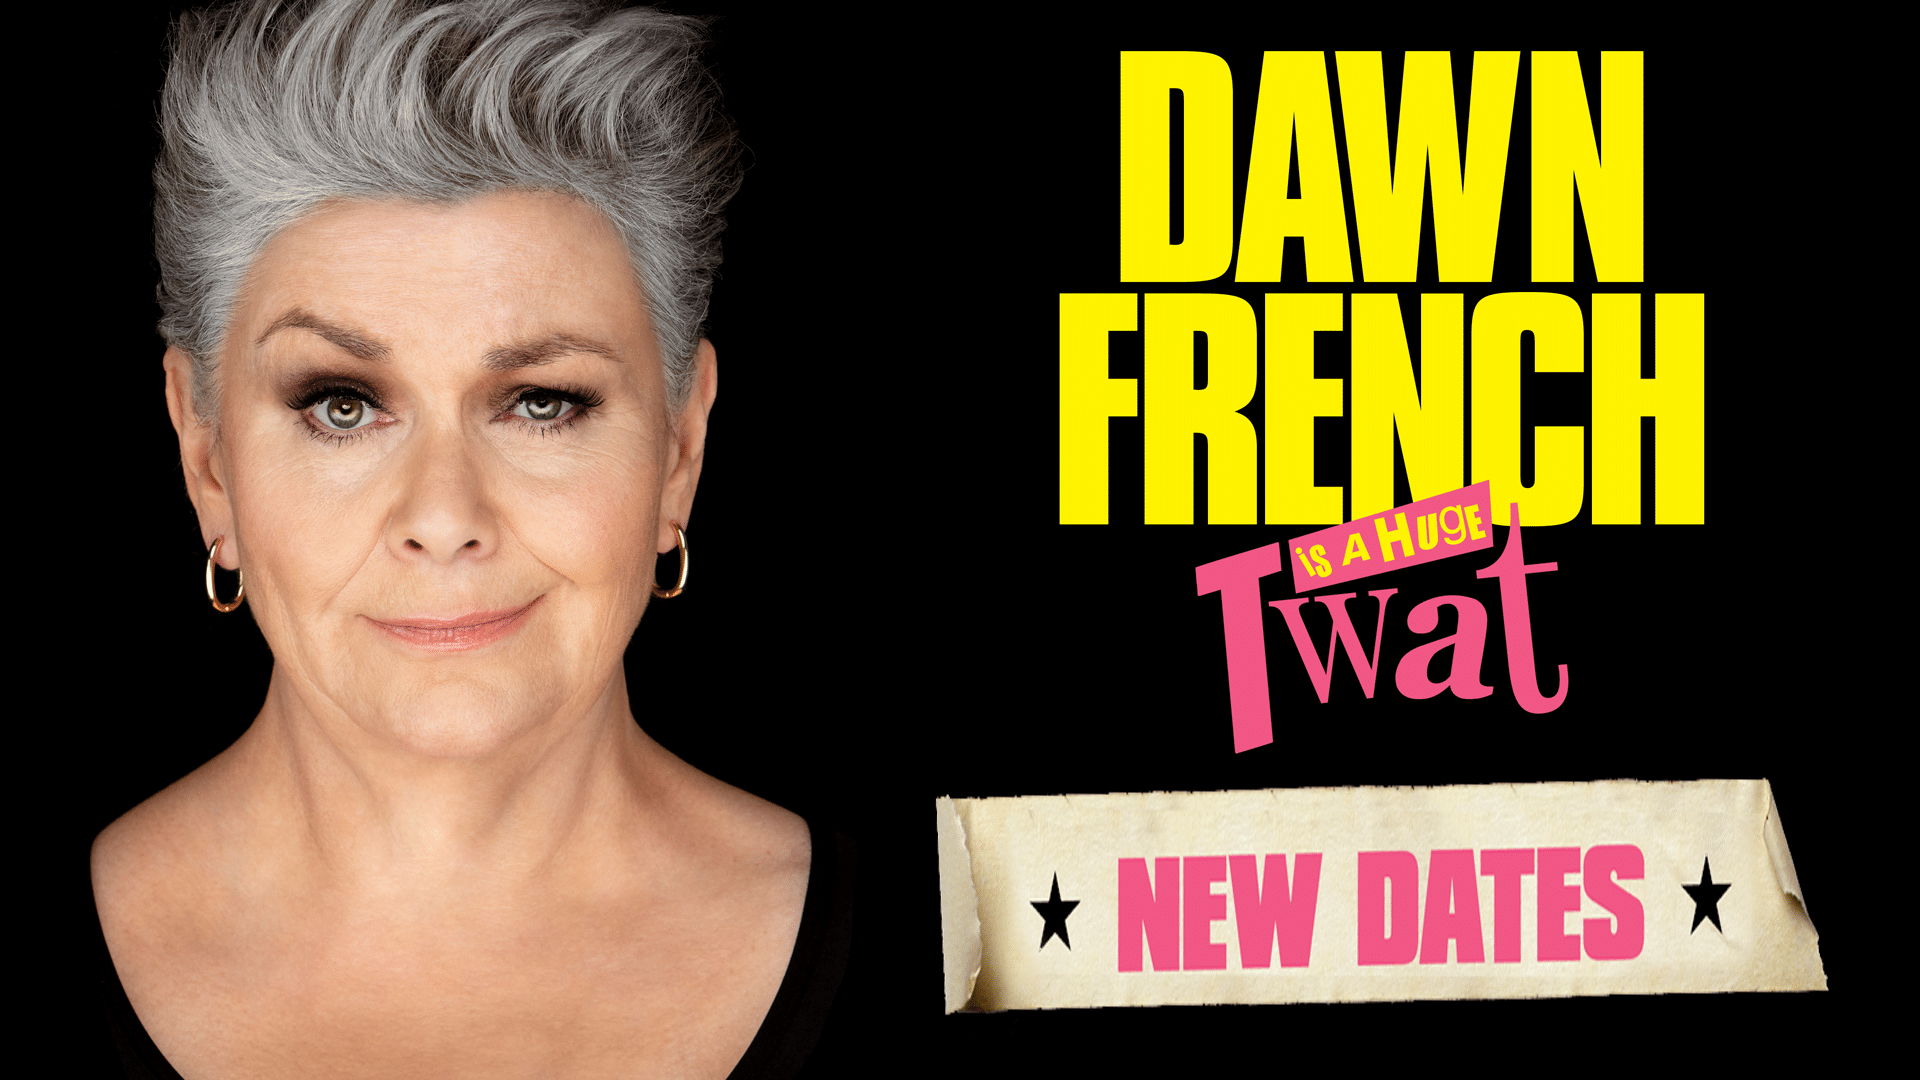 Promotional Image: A headshot of Dawn French smirking, with one raised eyebrow. The text above her head reads (top to bottom) 'DAWN FRENCH IS A HUGE Tw*t'. Written across the bottom, as if on a paper banner, the words 'NEW DATES'.